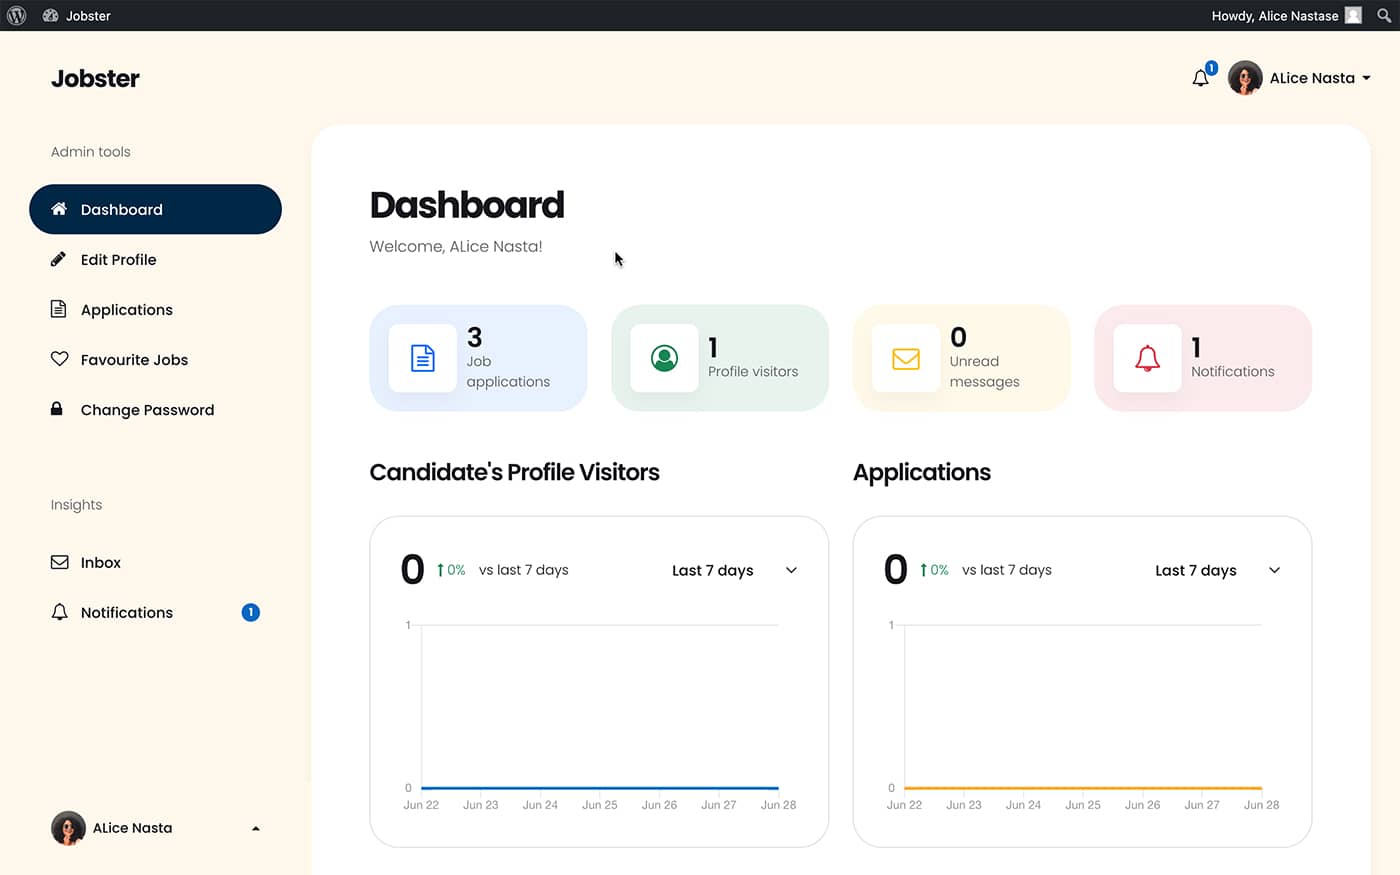 Jobster candidate dashboard page front-end